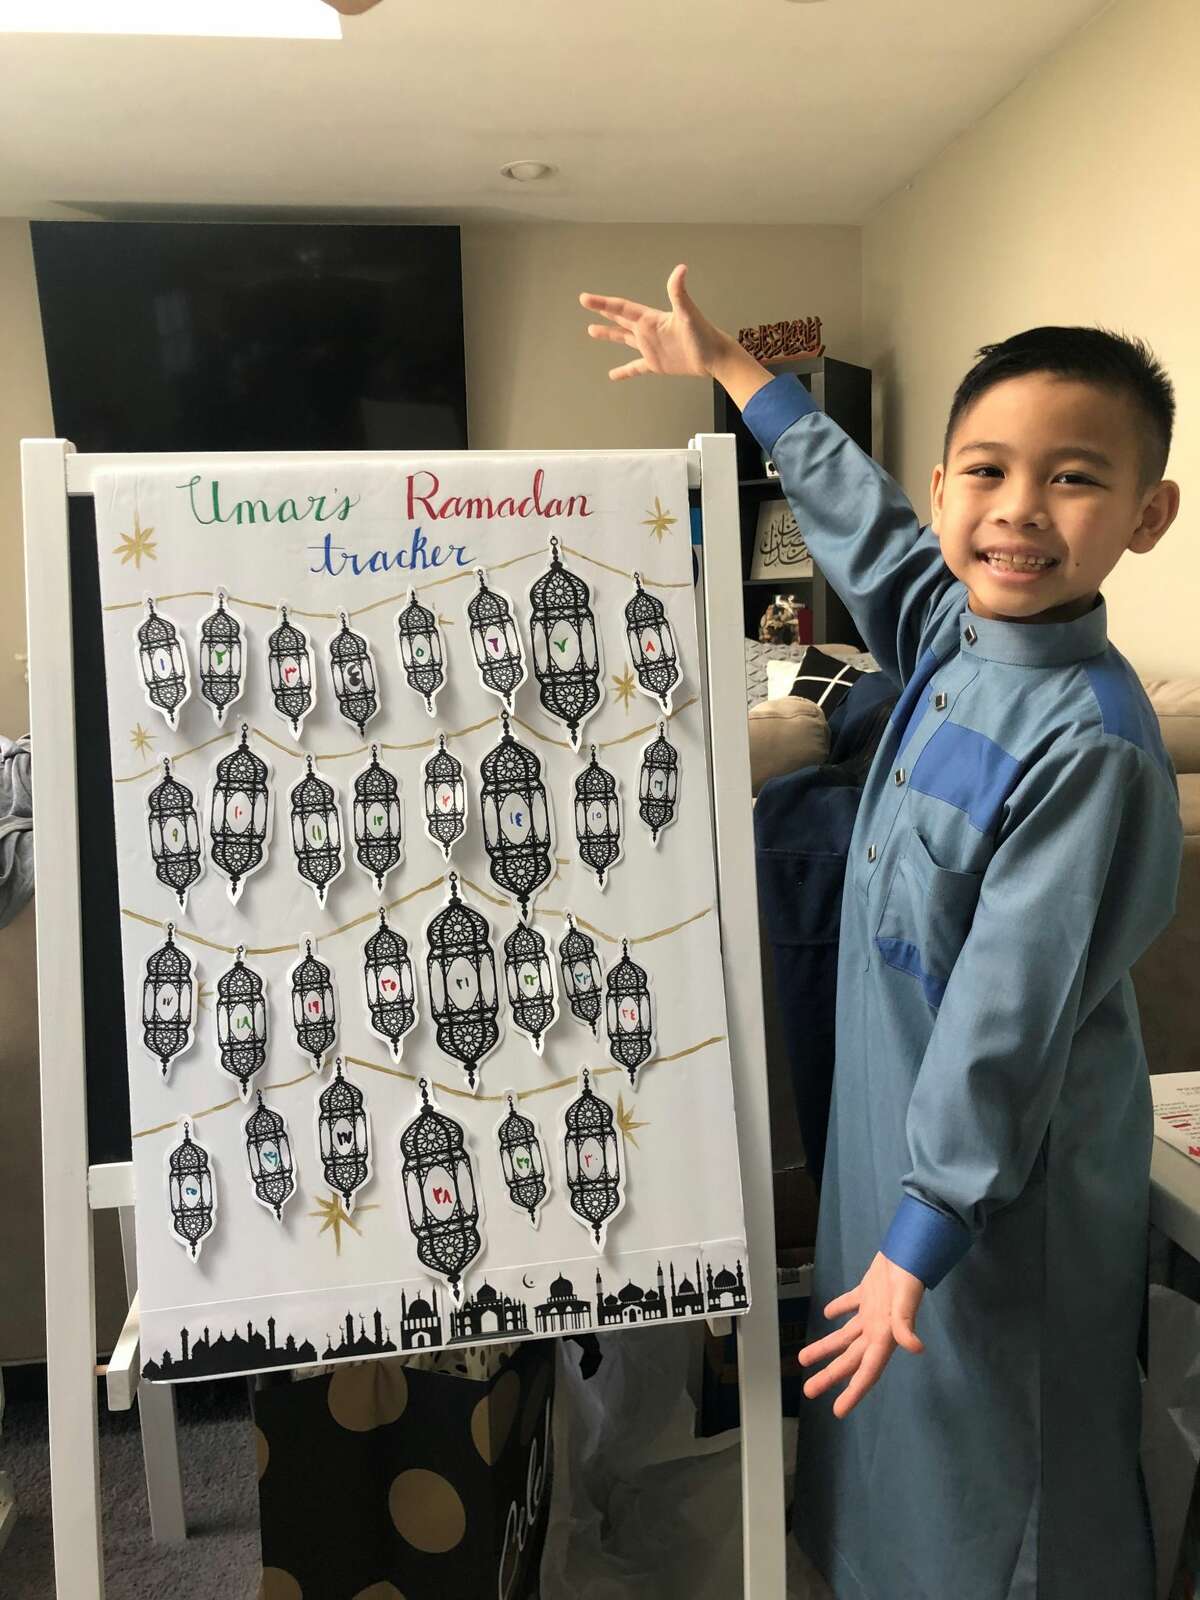 Umar Diep, 9, of Colonie displays his Ramadan tracker, where he adds a lantern for each day he fasts.